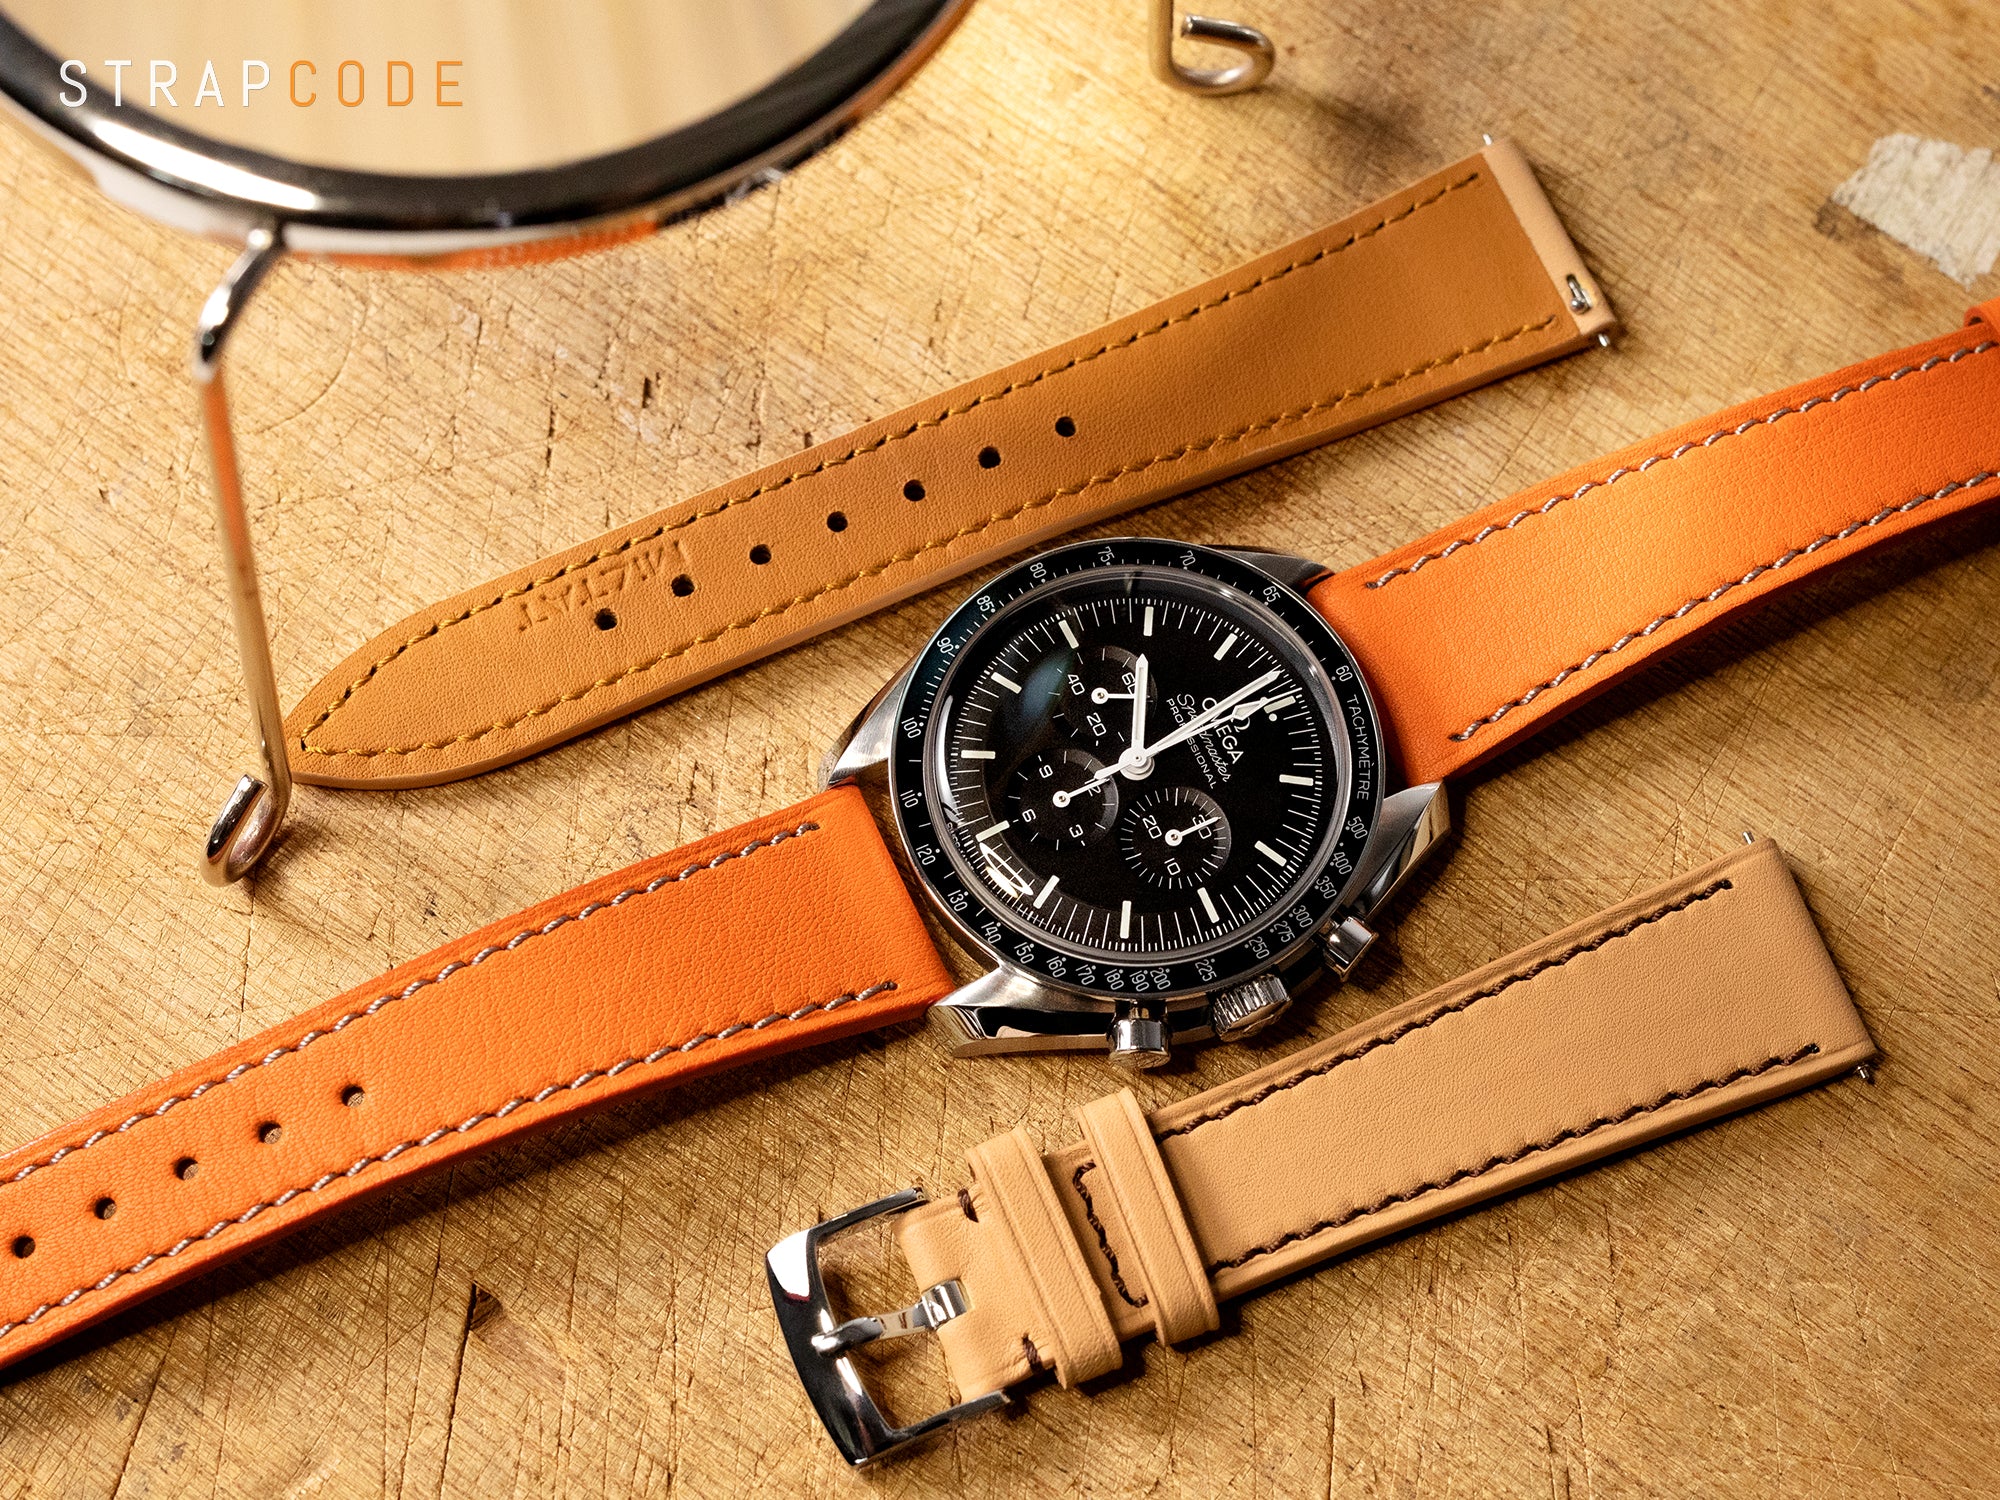 Omega Speedy best matching with the well-made Orange Leather Watch Band with Zermatt leather lining by Strapcode